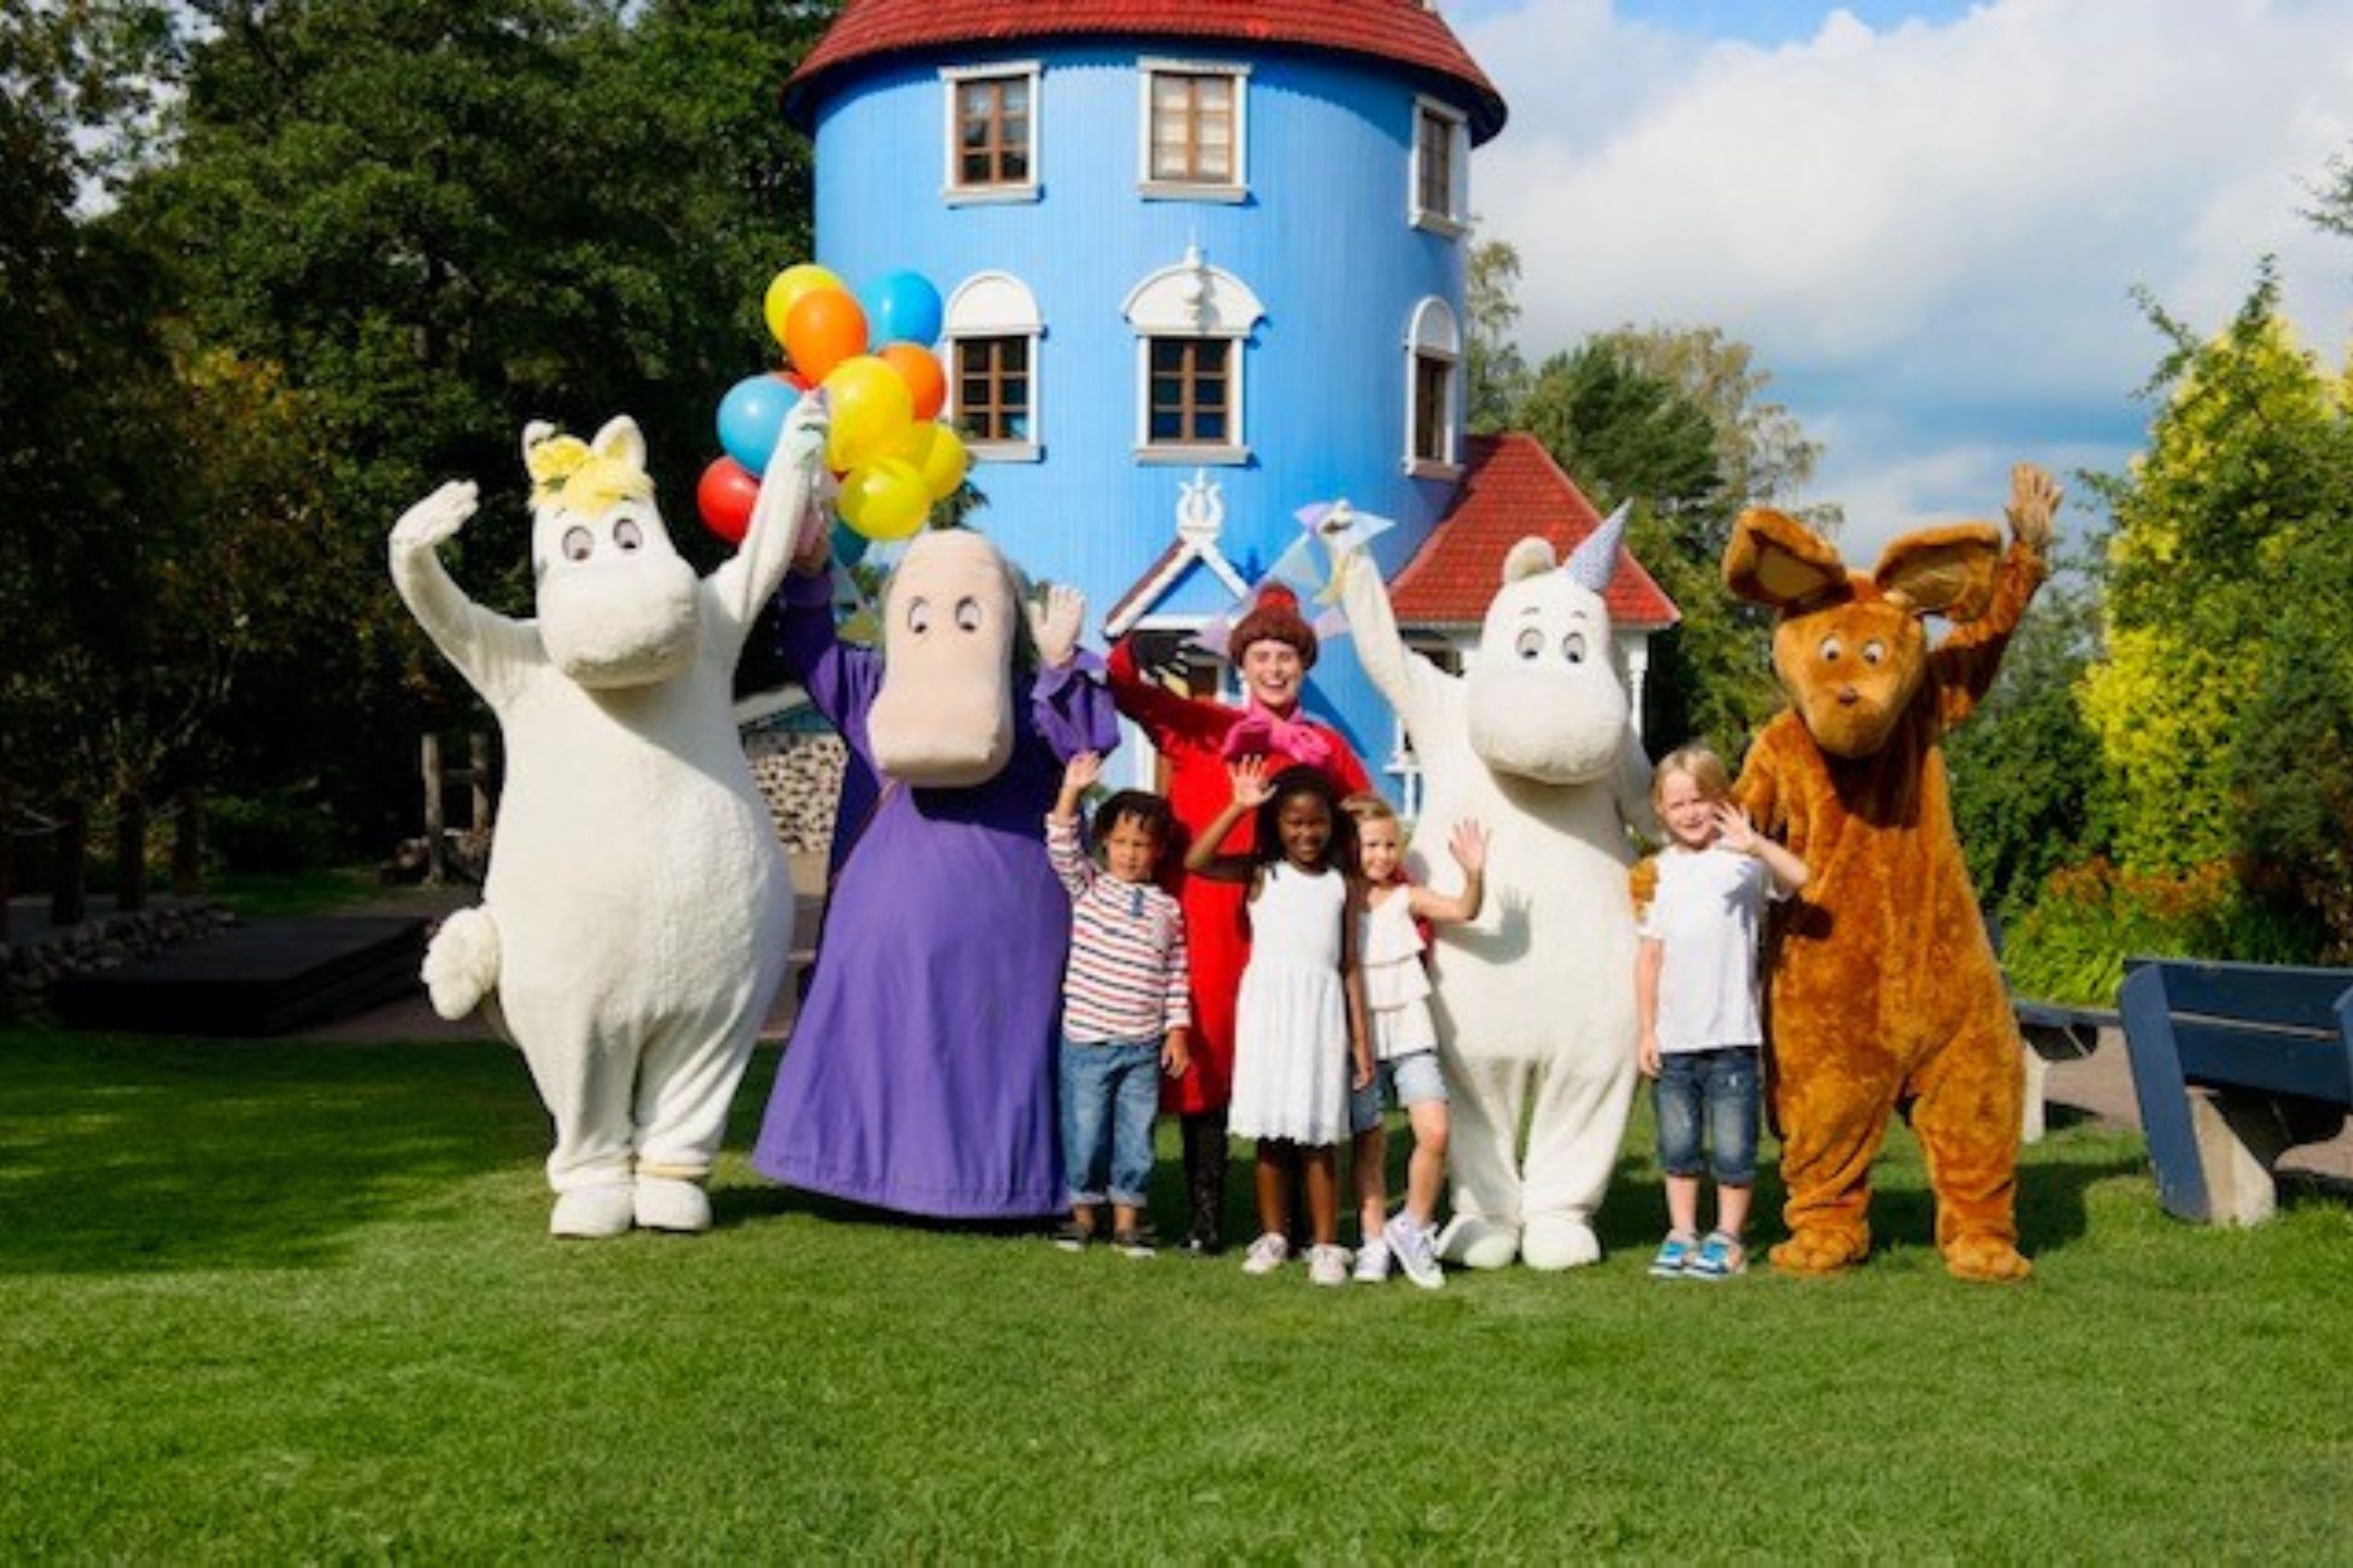 The famous Moomin theme park is only a few kilometers away. 